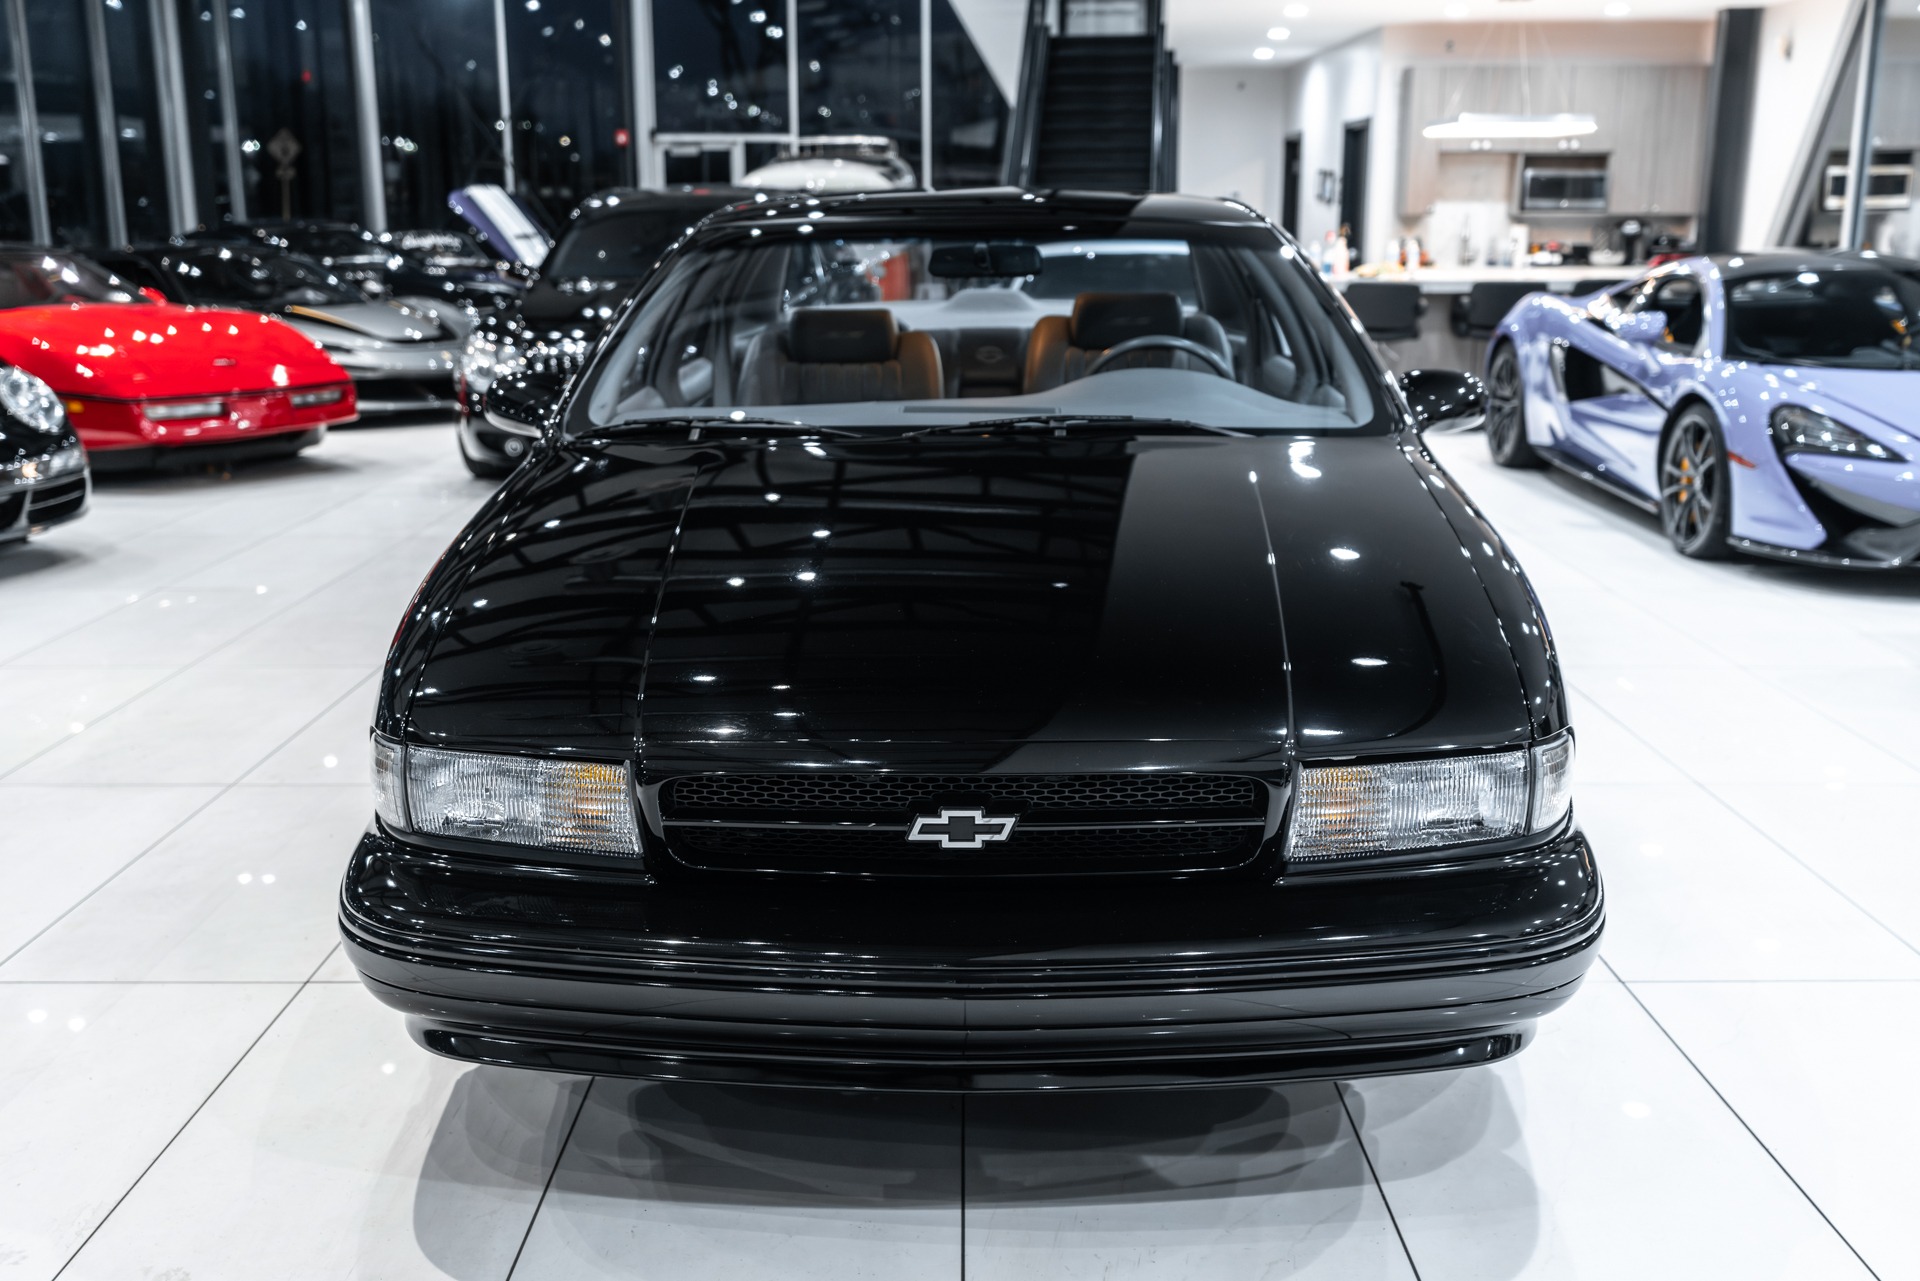 Used-1996-Chevrolet-Impala-SS-Only-6k-Miles-Collector-Condition-Stunning-Black-Paint